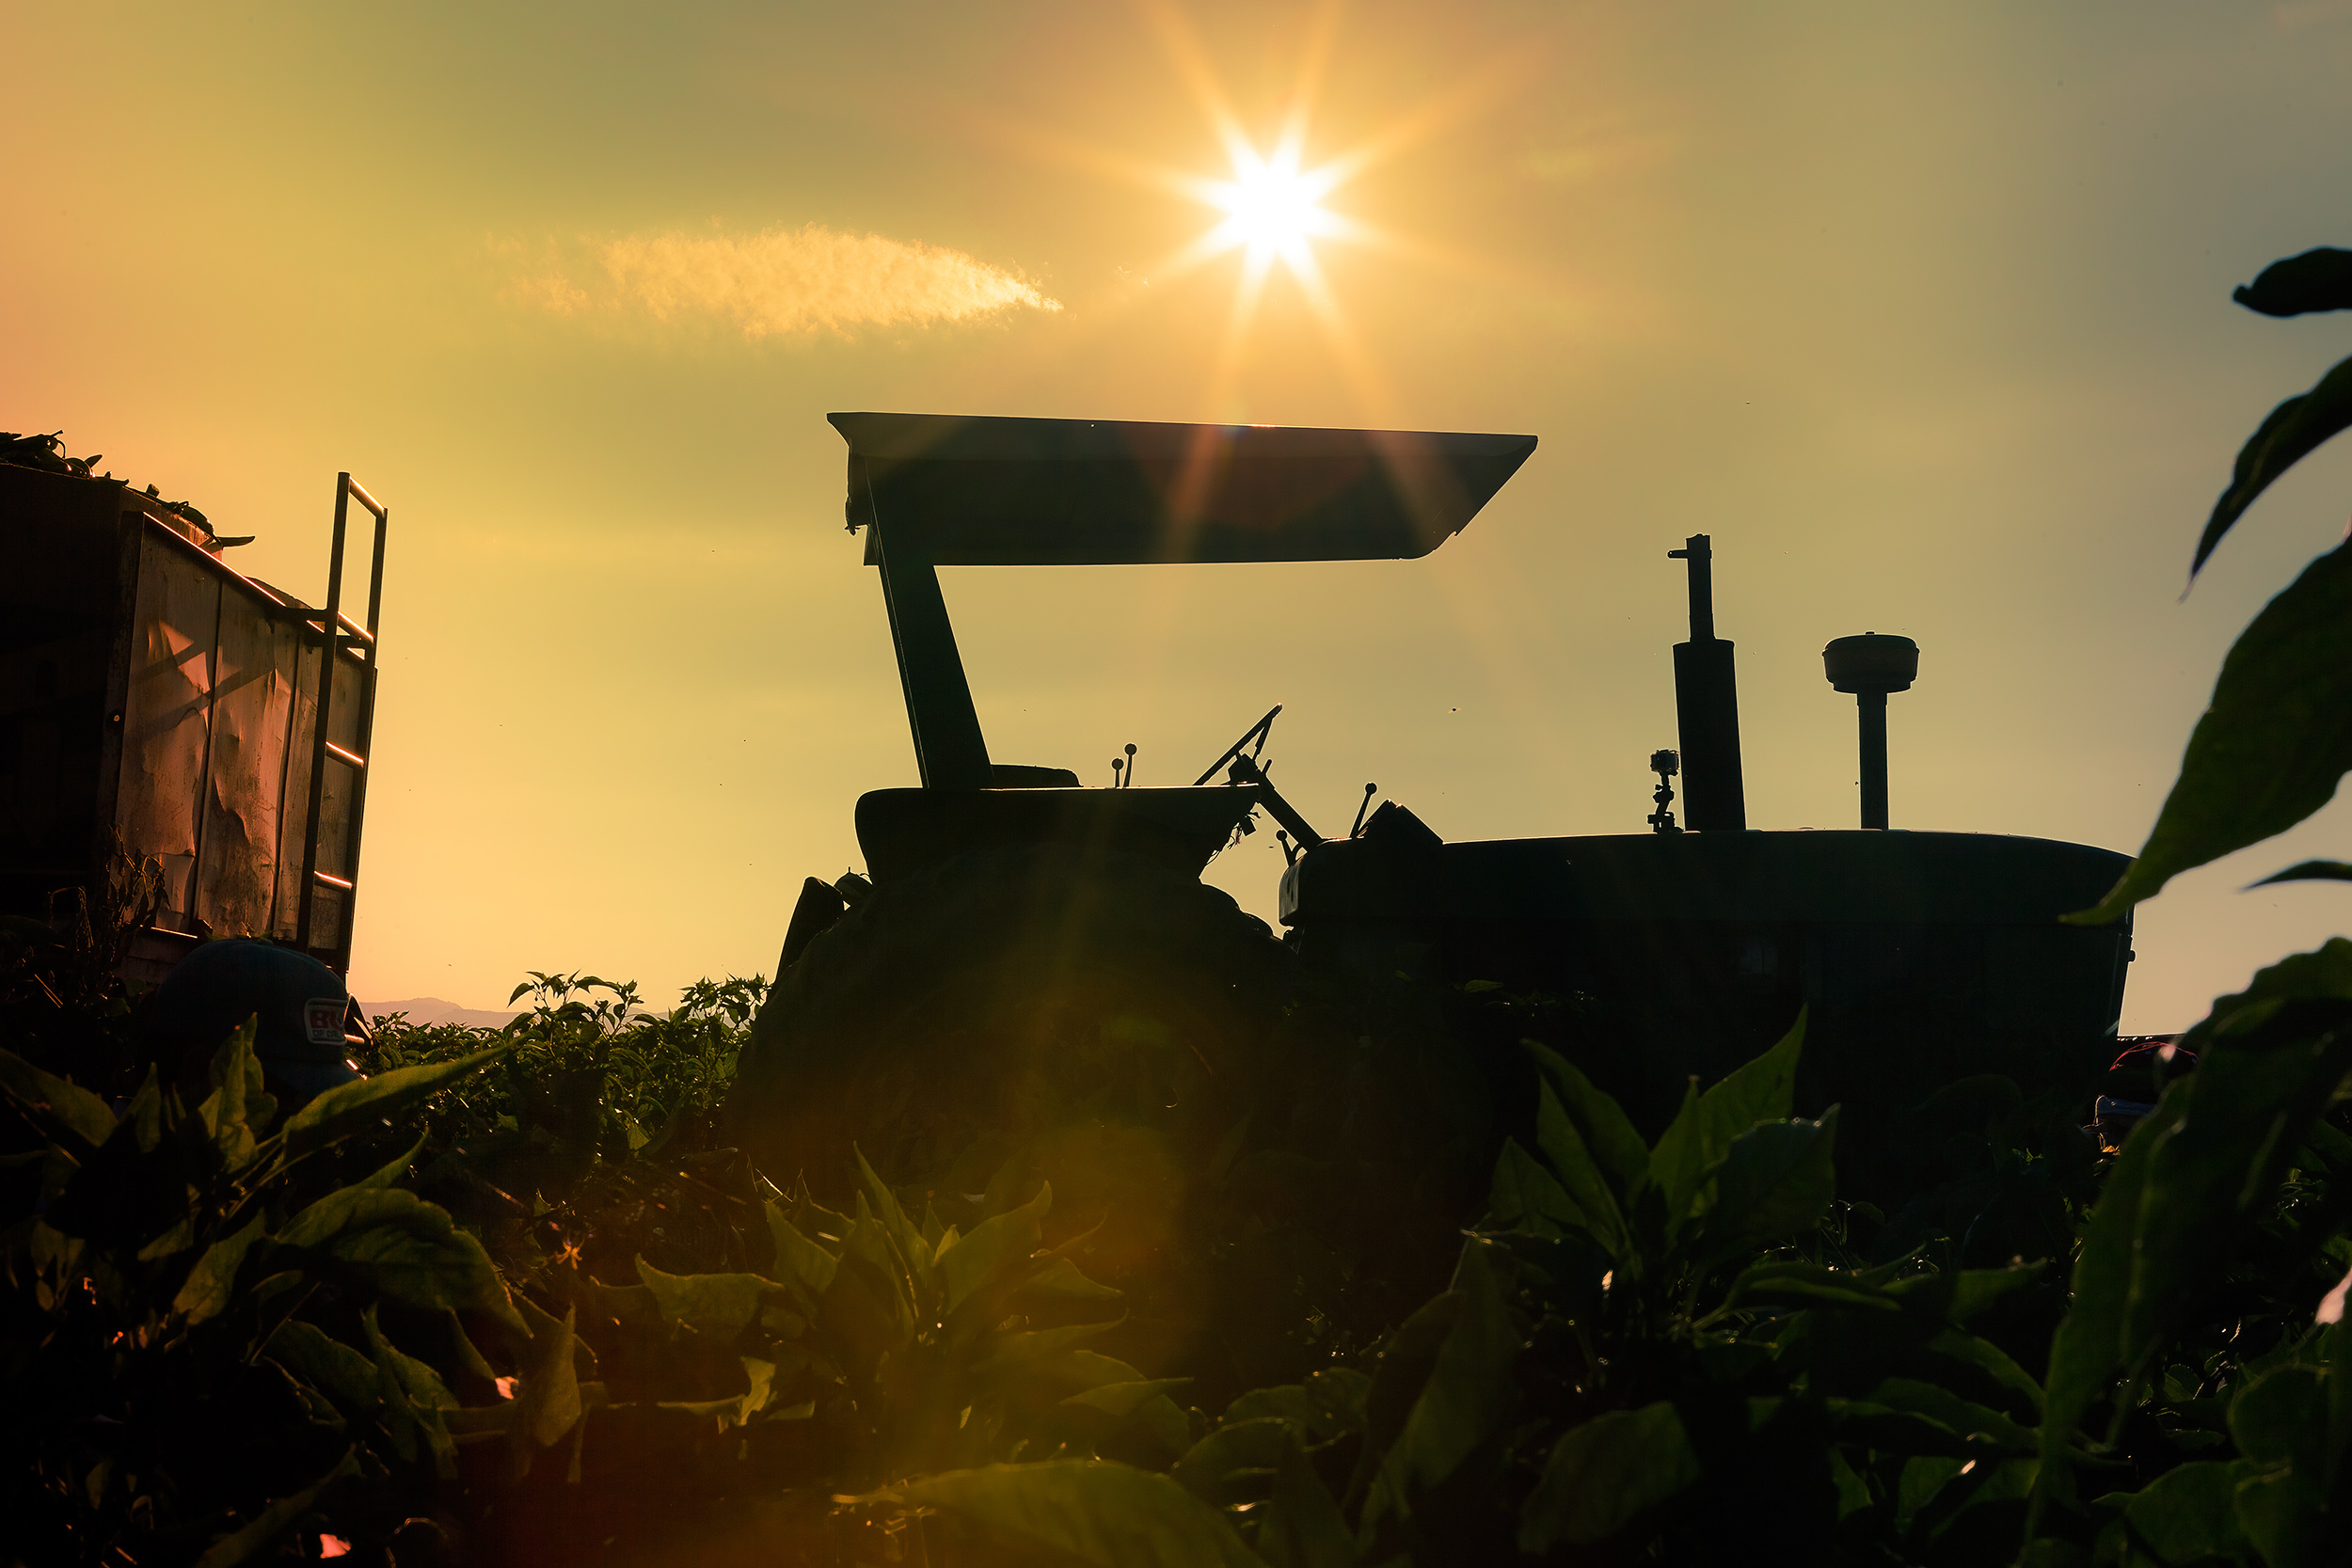  silhouette of tractor in field with sun flare. agriculture photography